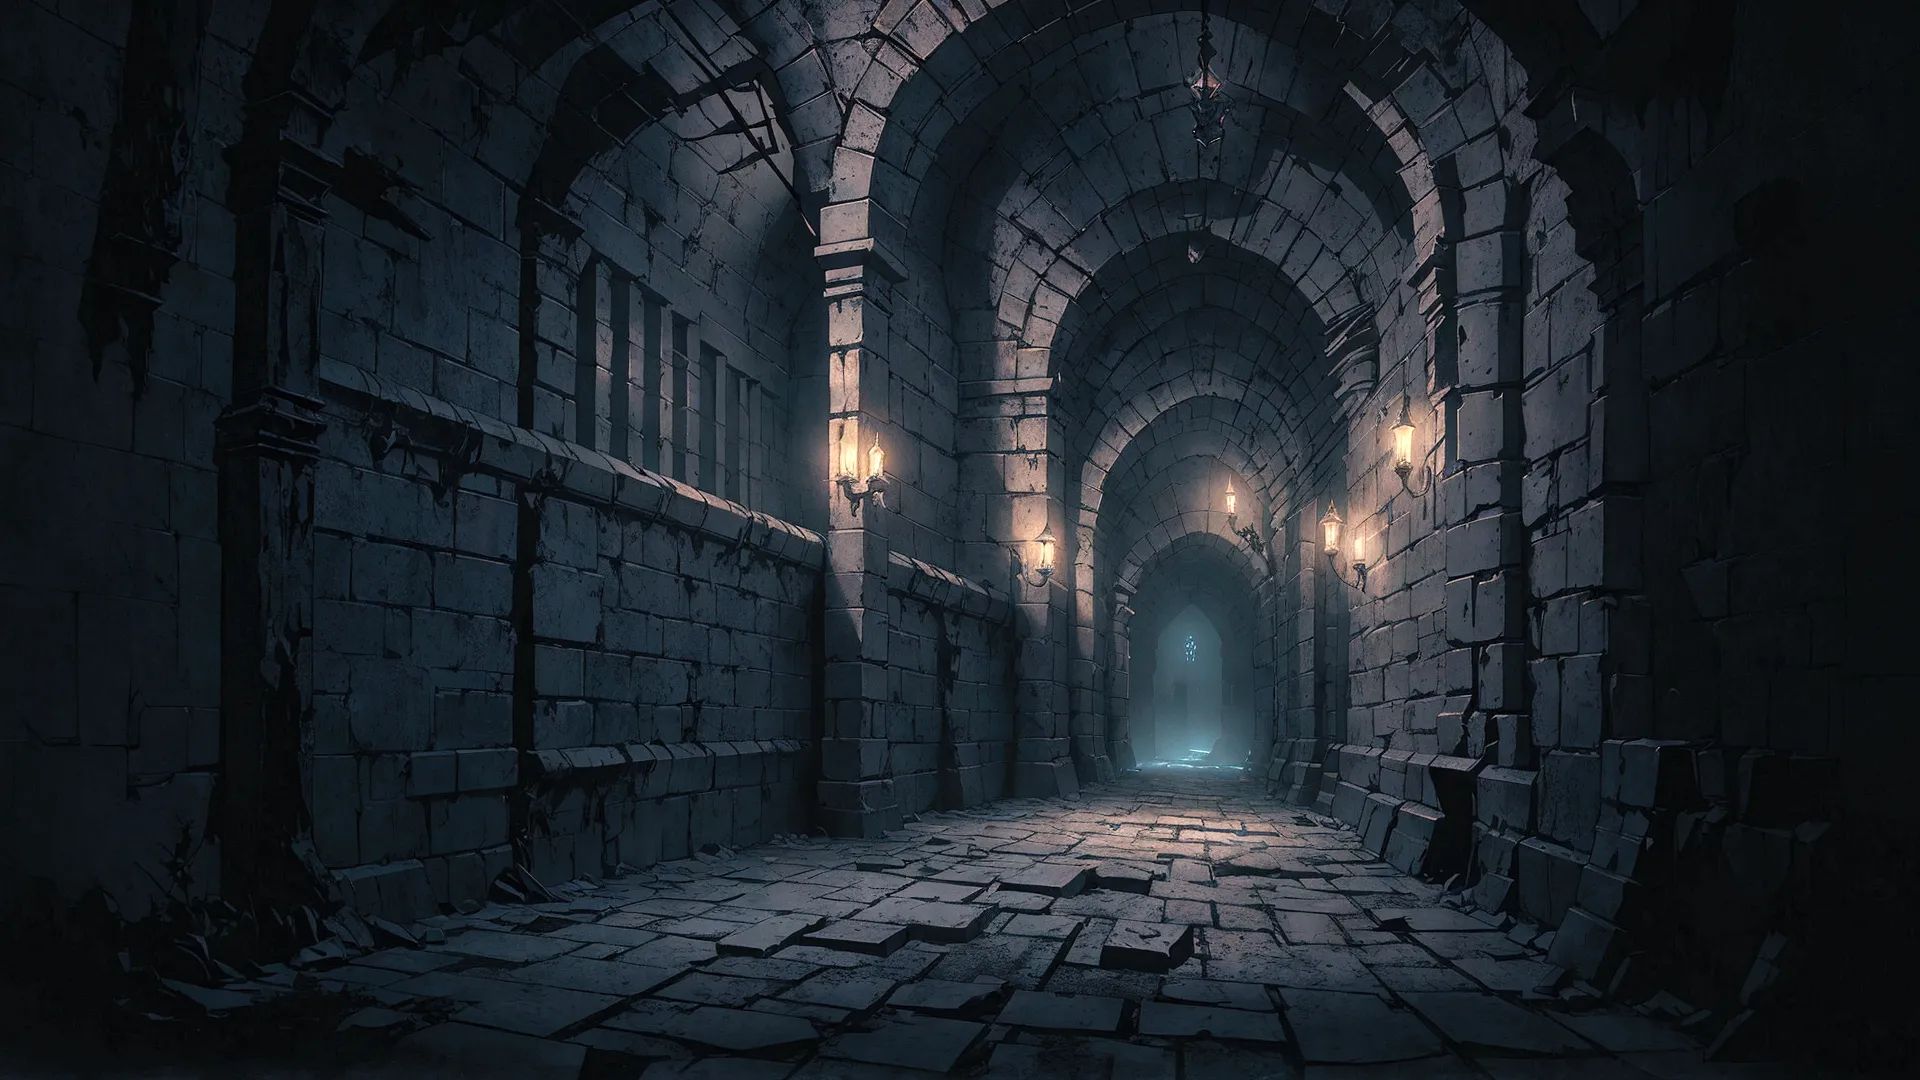 there is a dungeon hallway, passages have prison cells, photorealistic dark concept art, detailed textures and lighting, beautif...